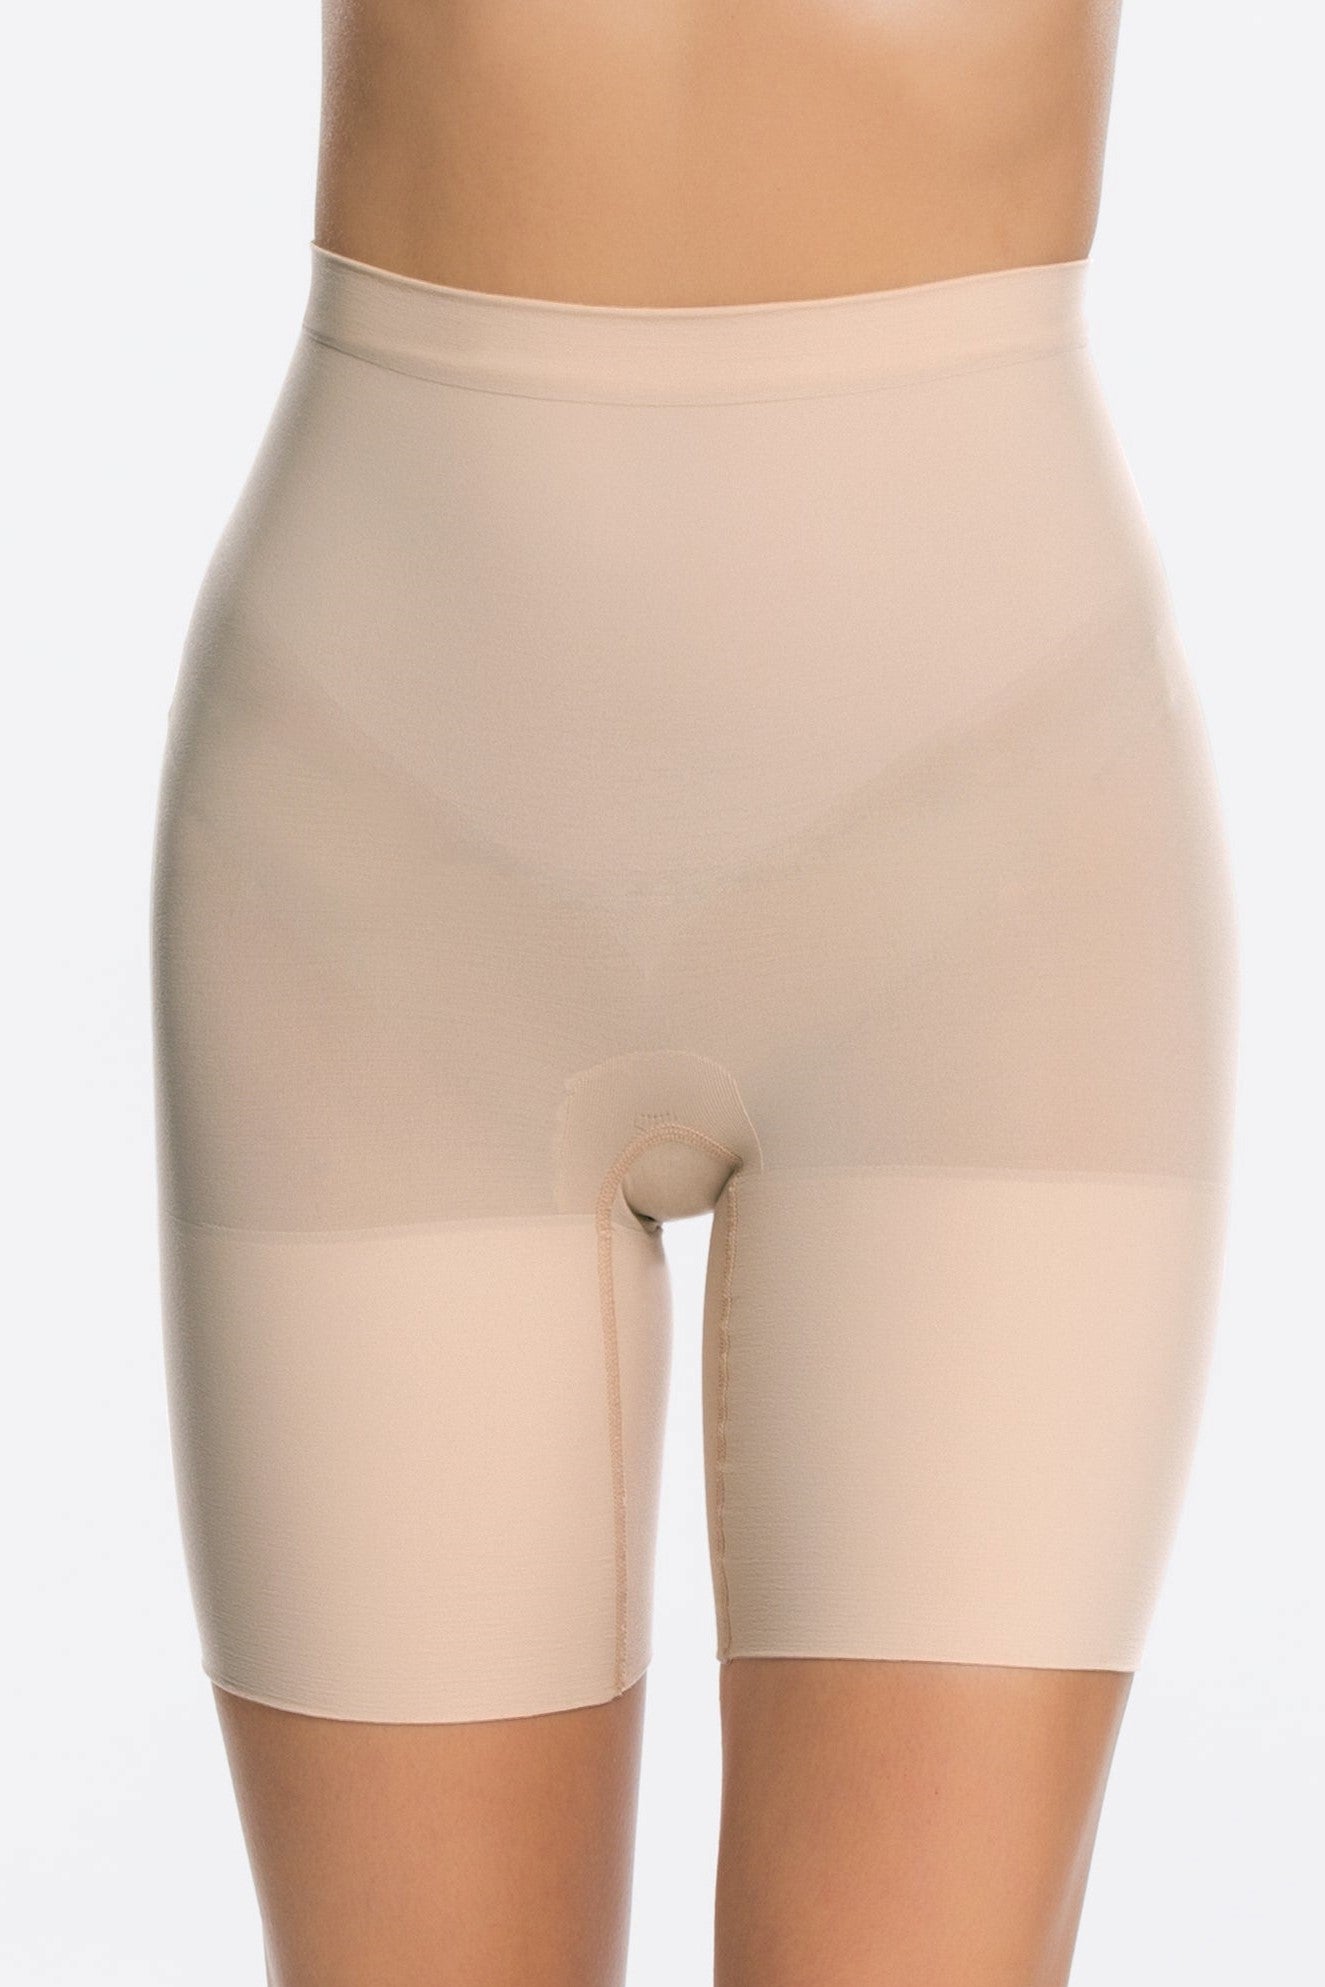 SPANX Higher Power HIGH-WAISTED Power Panties LARGE - NUDE